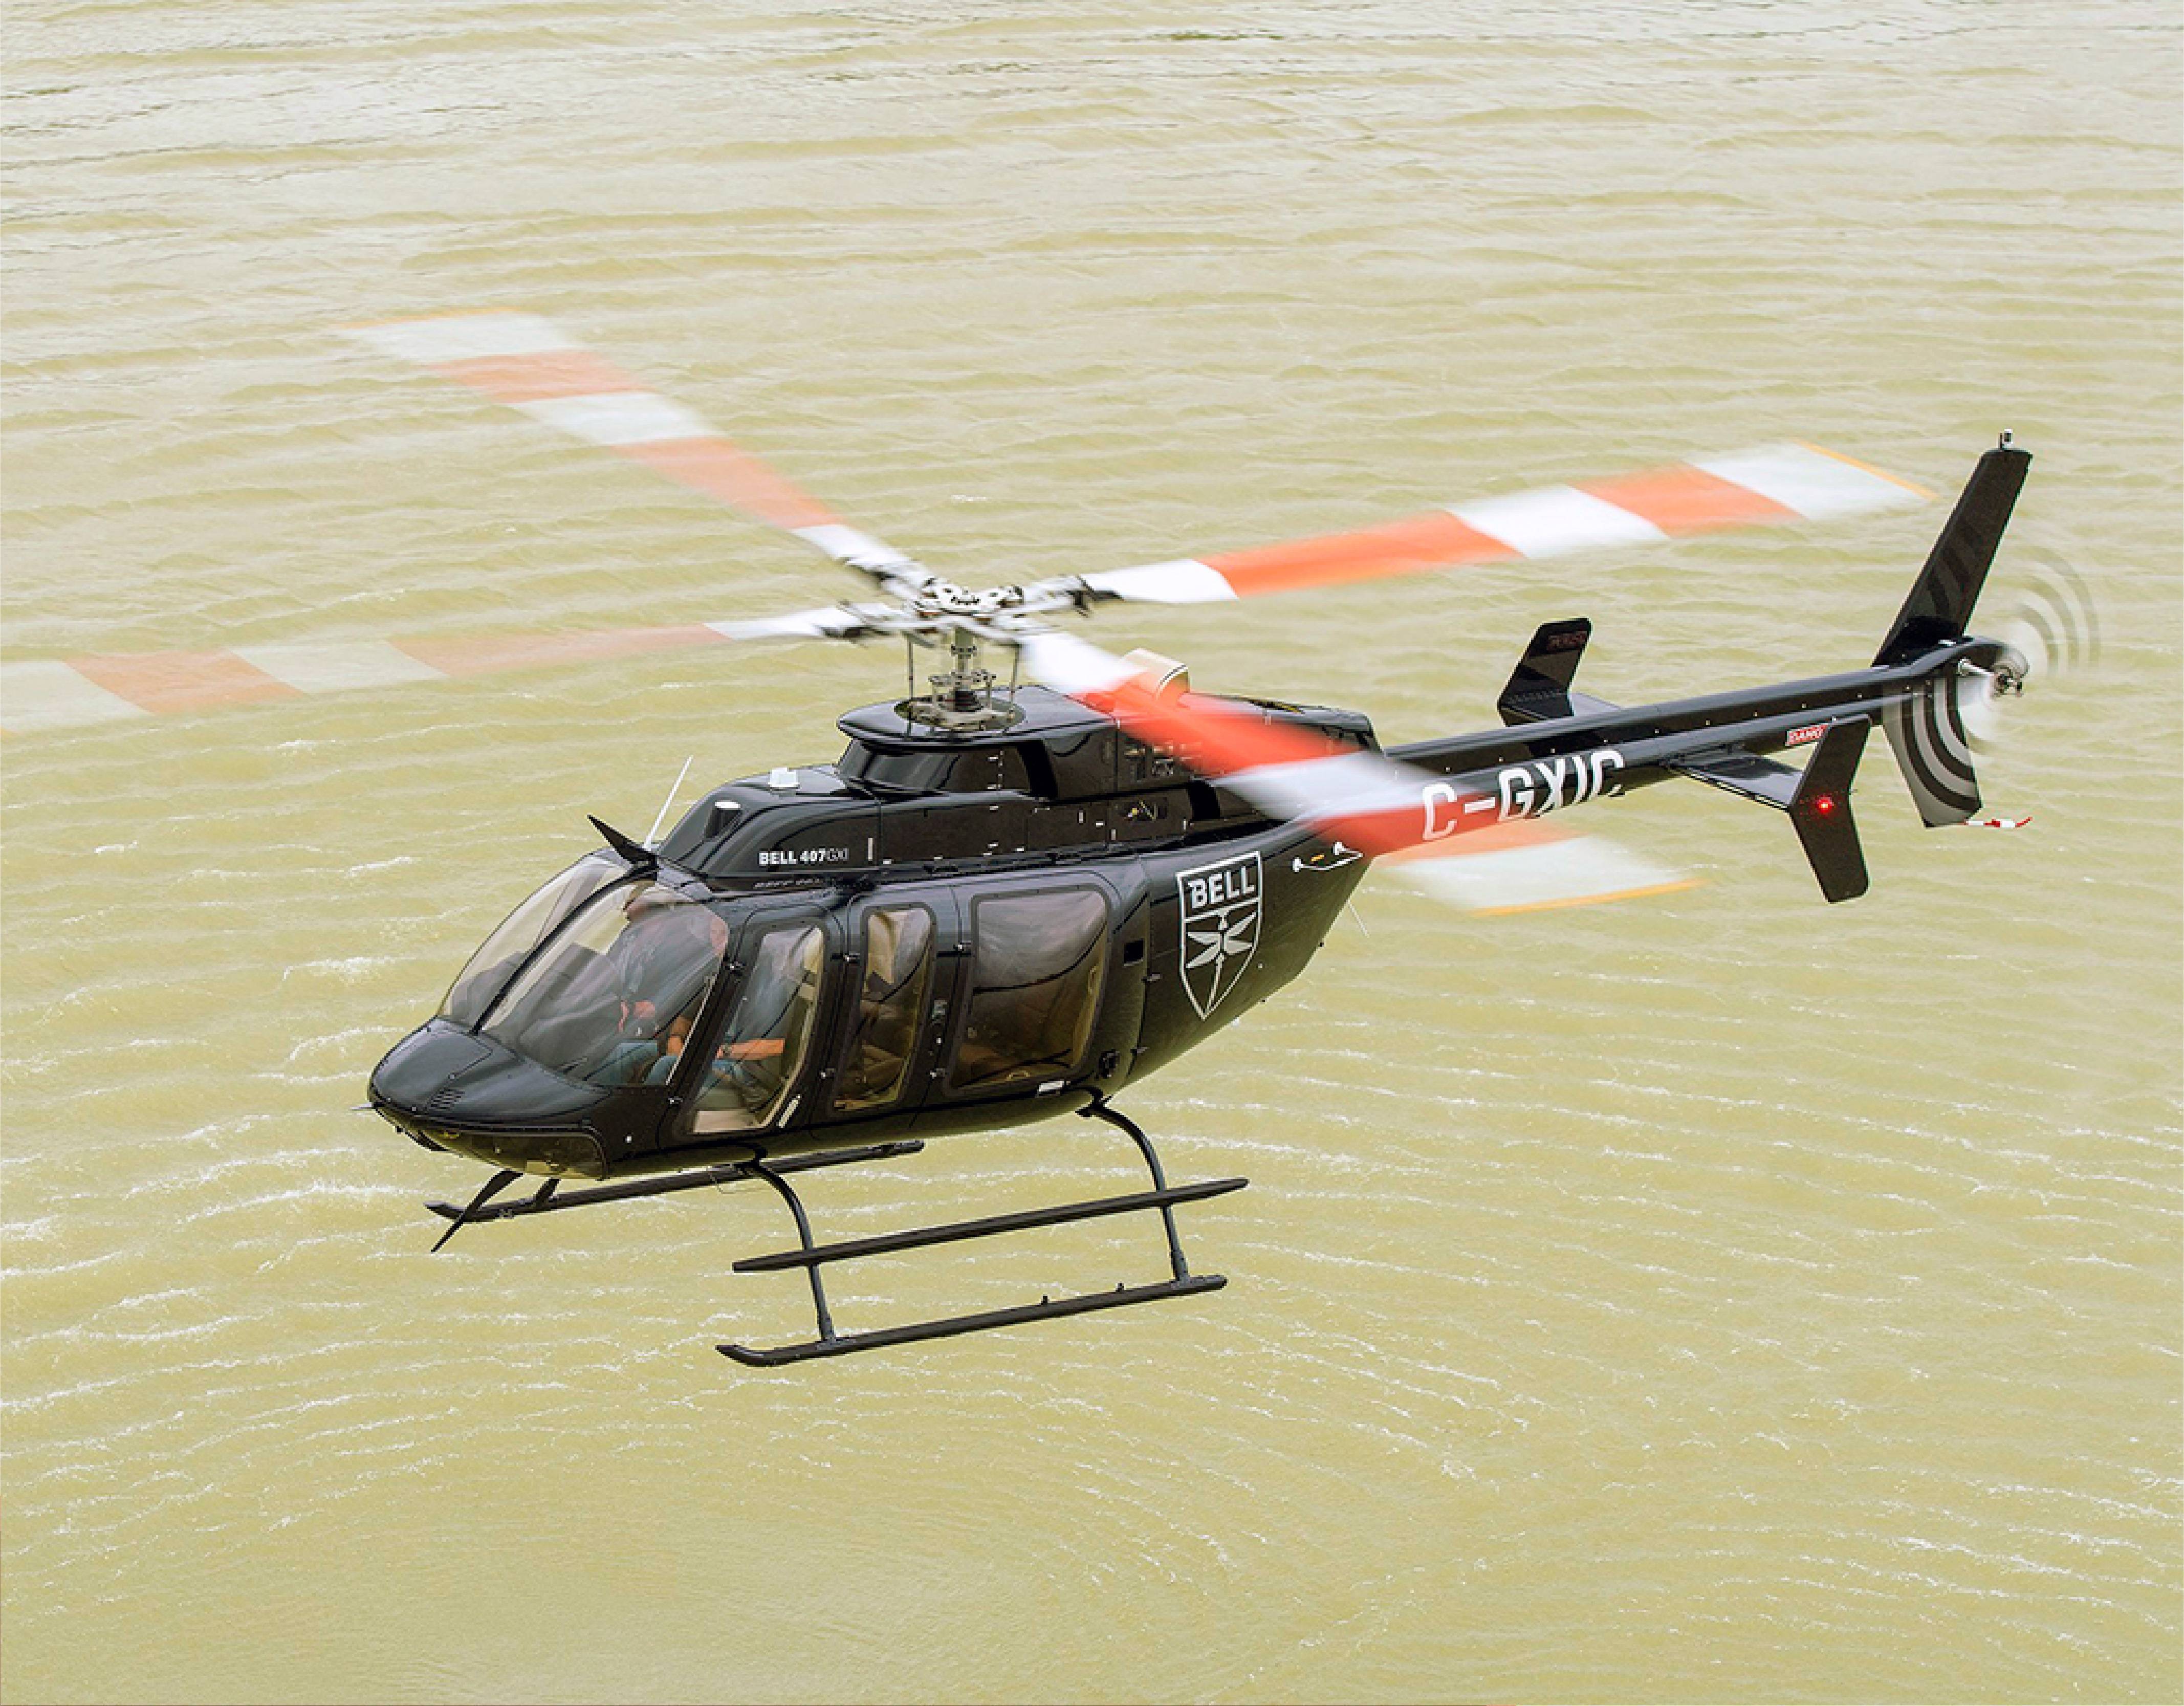 The Precise Flight Pulselite system will now be included as standard equipment on all new Bell 407GXi aircraft. Bell Photo